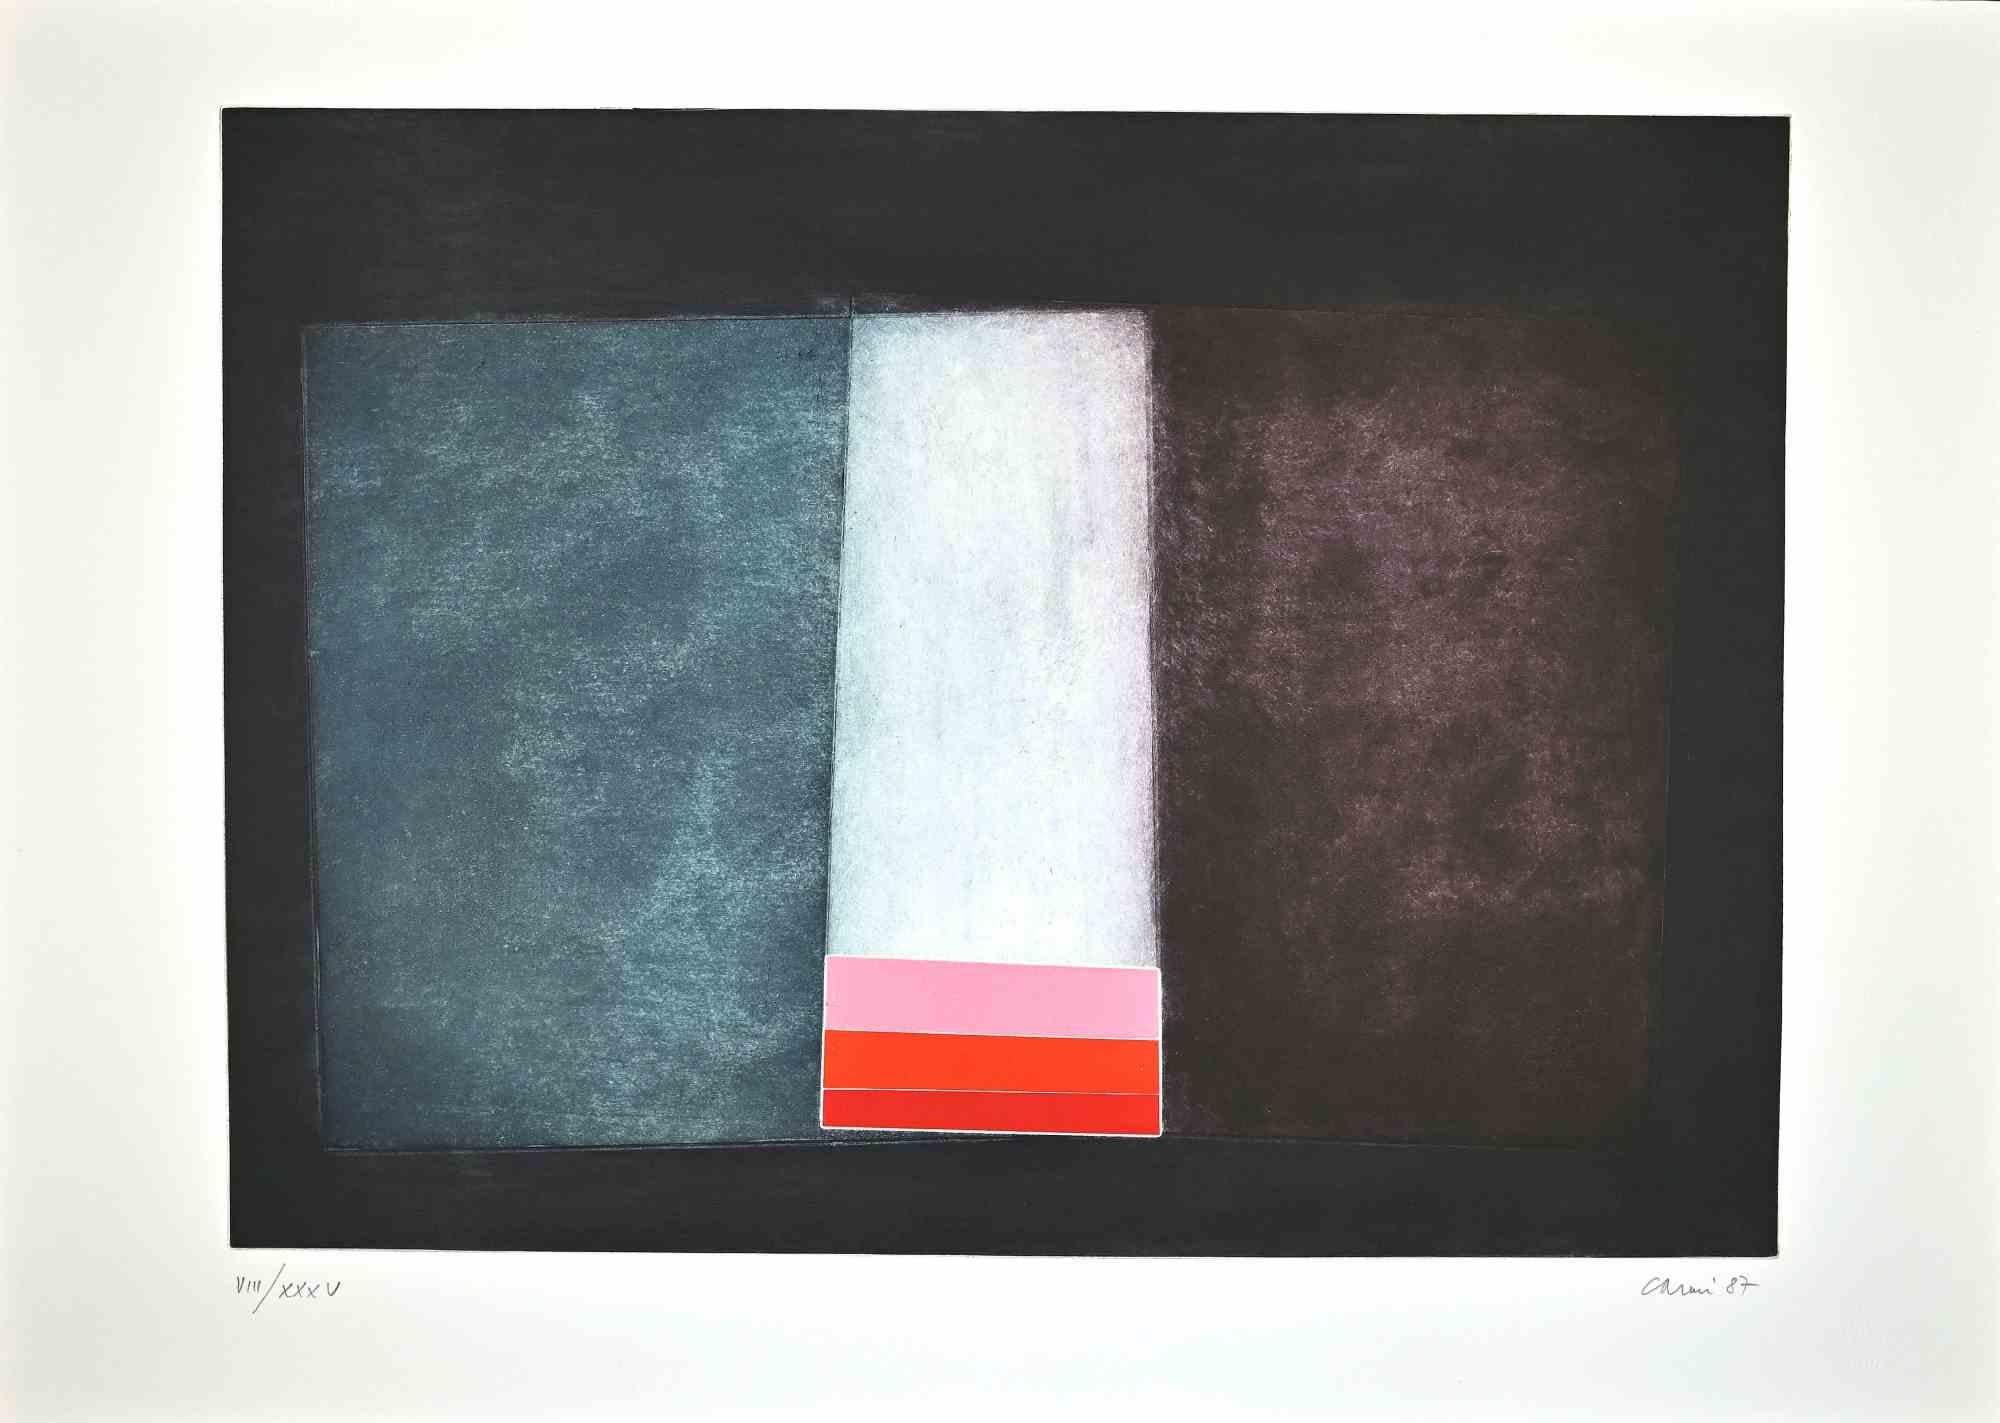 Abstract Compositionis an original etching made by Eugenio Carmi (Genoa, 1920 - Lugano, 2016) in 1987.

Good conditions.

Hand signed and numbered. Edition, VIII/XXXV.

Eugenio Carmi (Genoa, 1920 - Lugano, 2016) was an Italian painter, an exponent